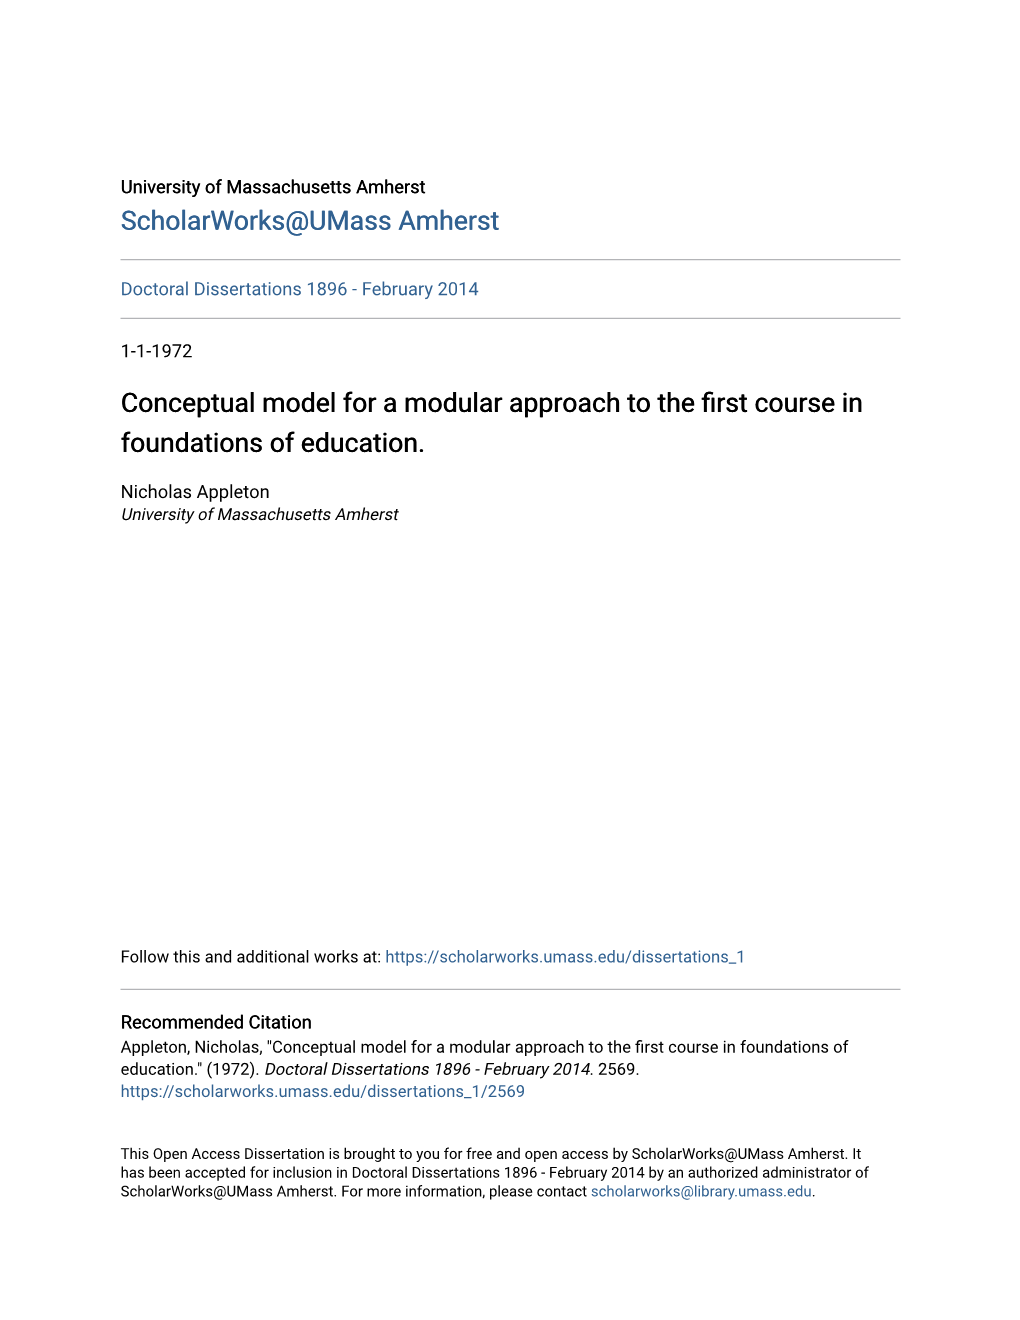 Conceptual Model for a Modular Approach to the First Course in Foundations of Education